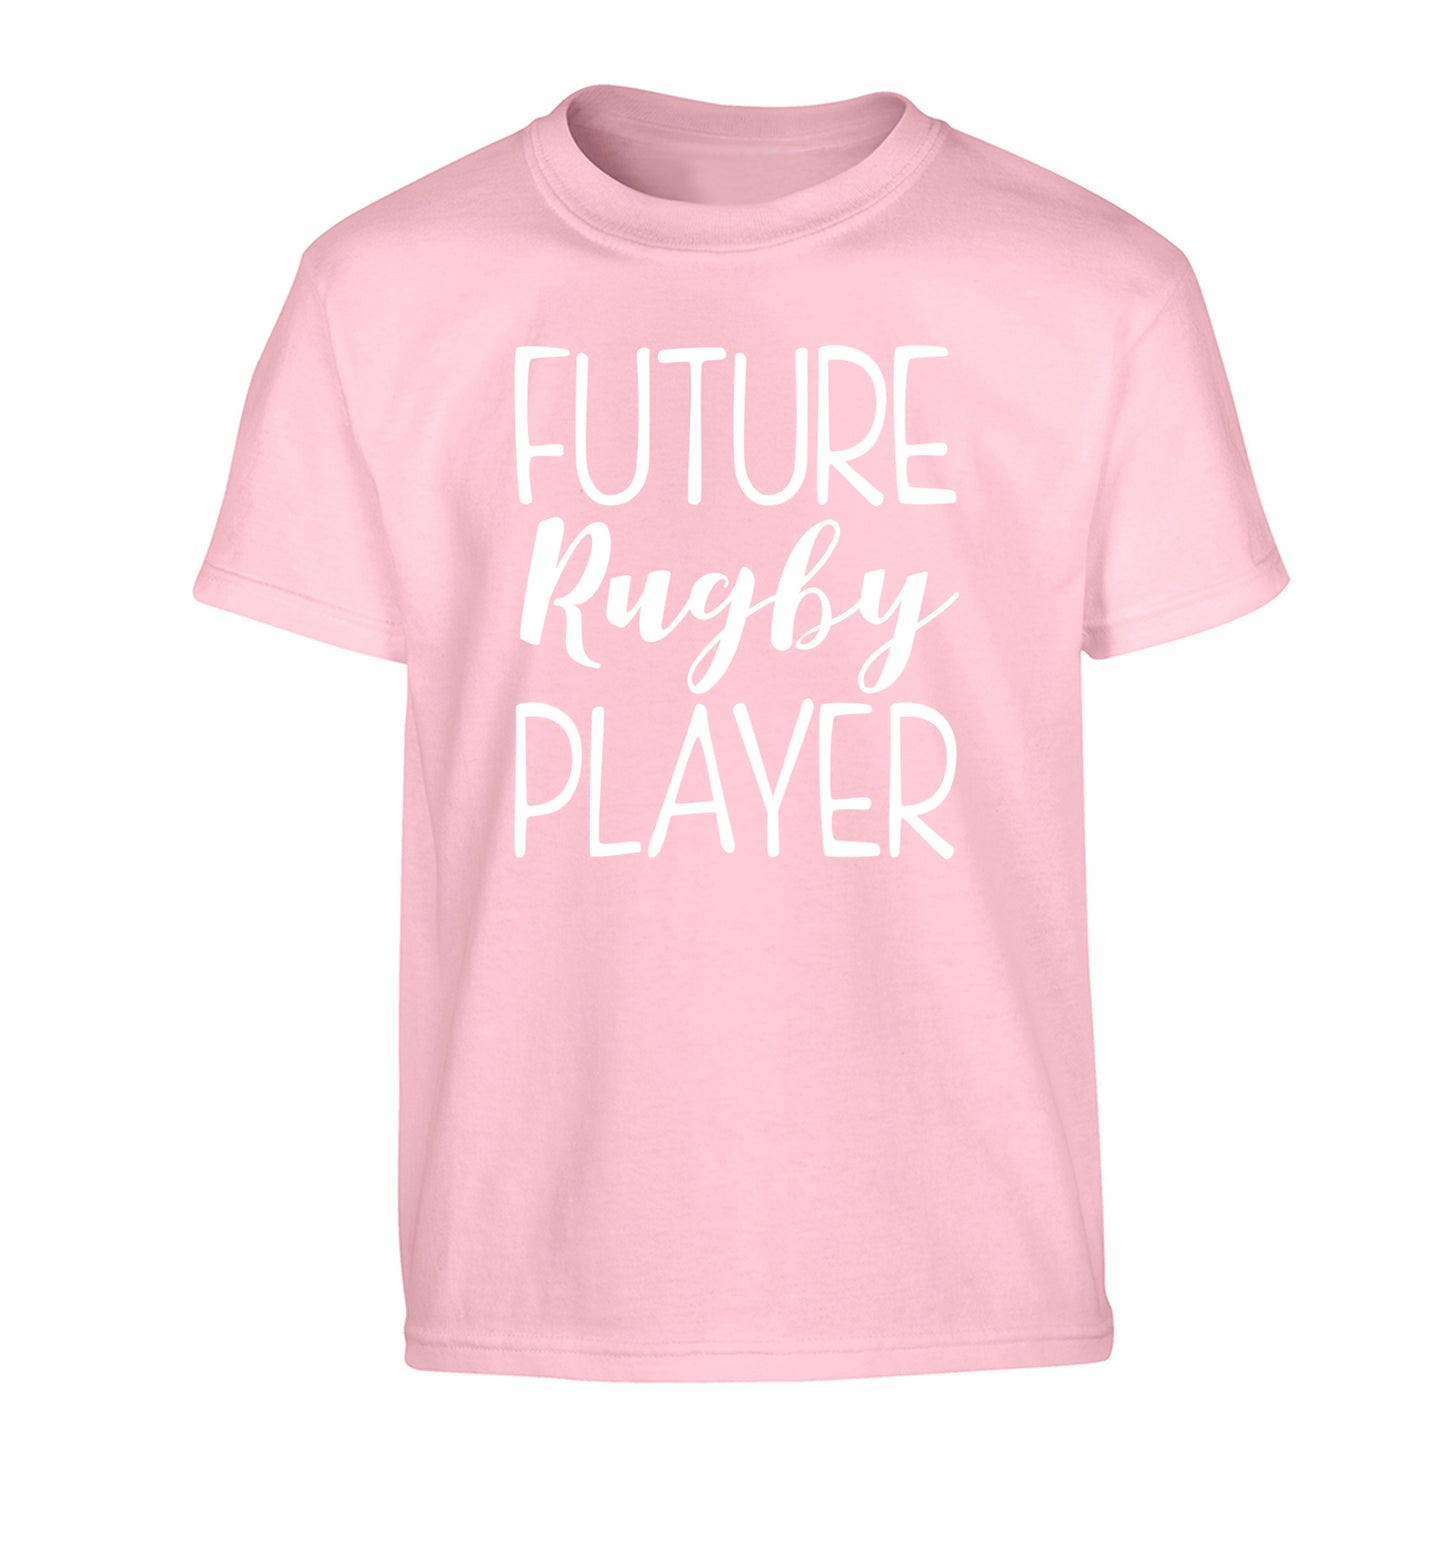 Future rugby player Children's light pink Tshirt 12-13 Years